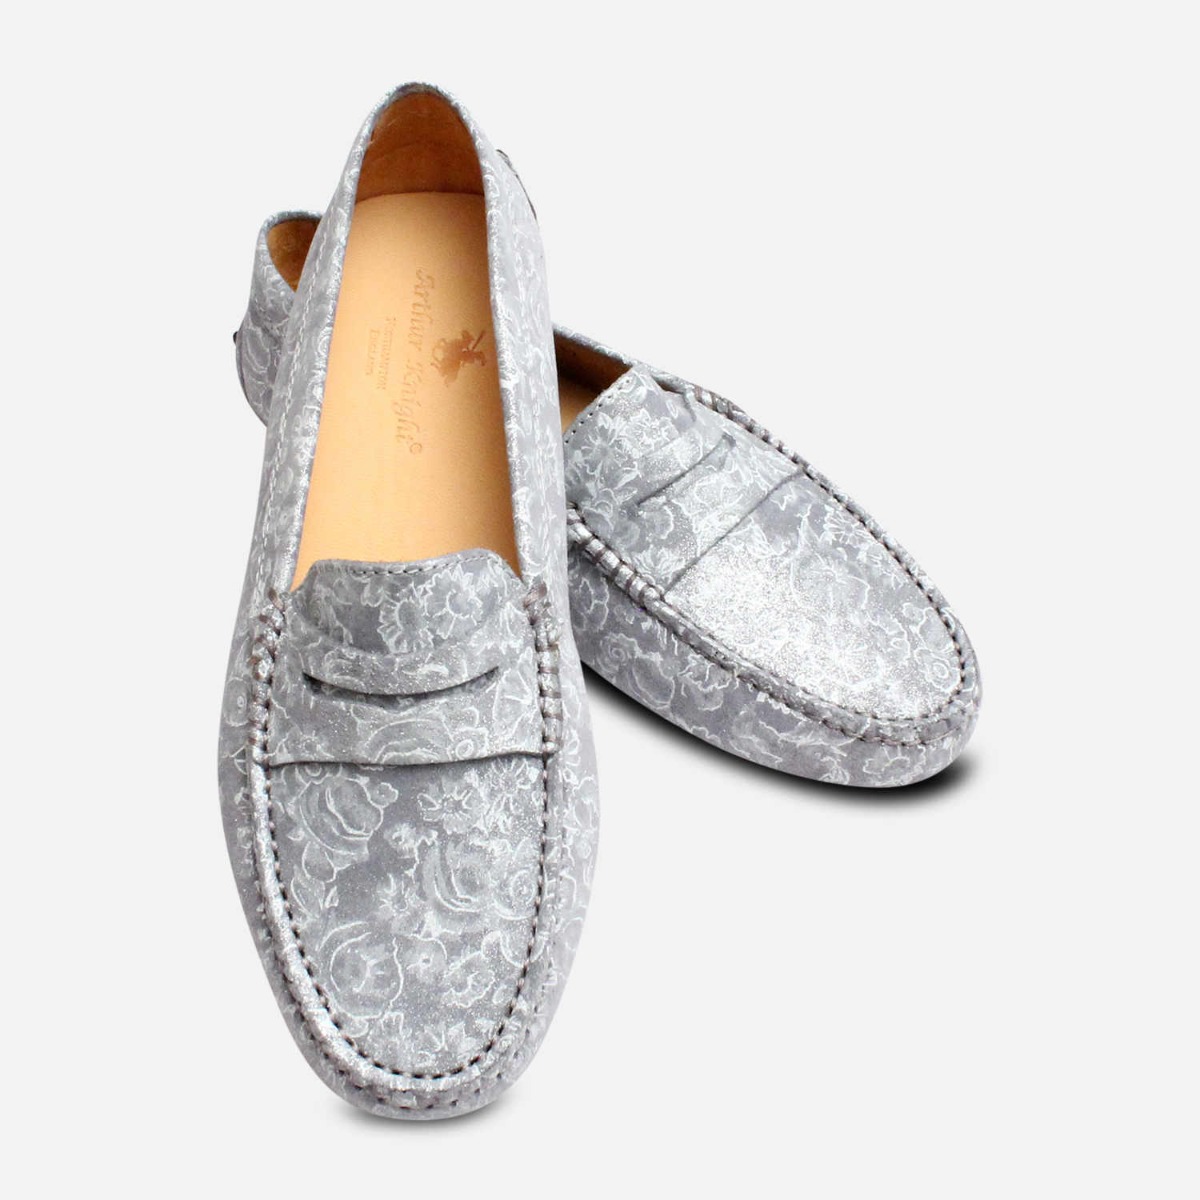 silver driving shoes